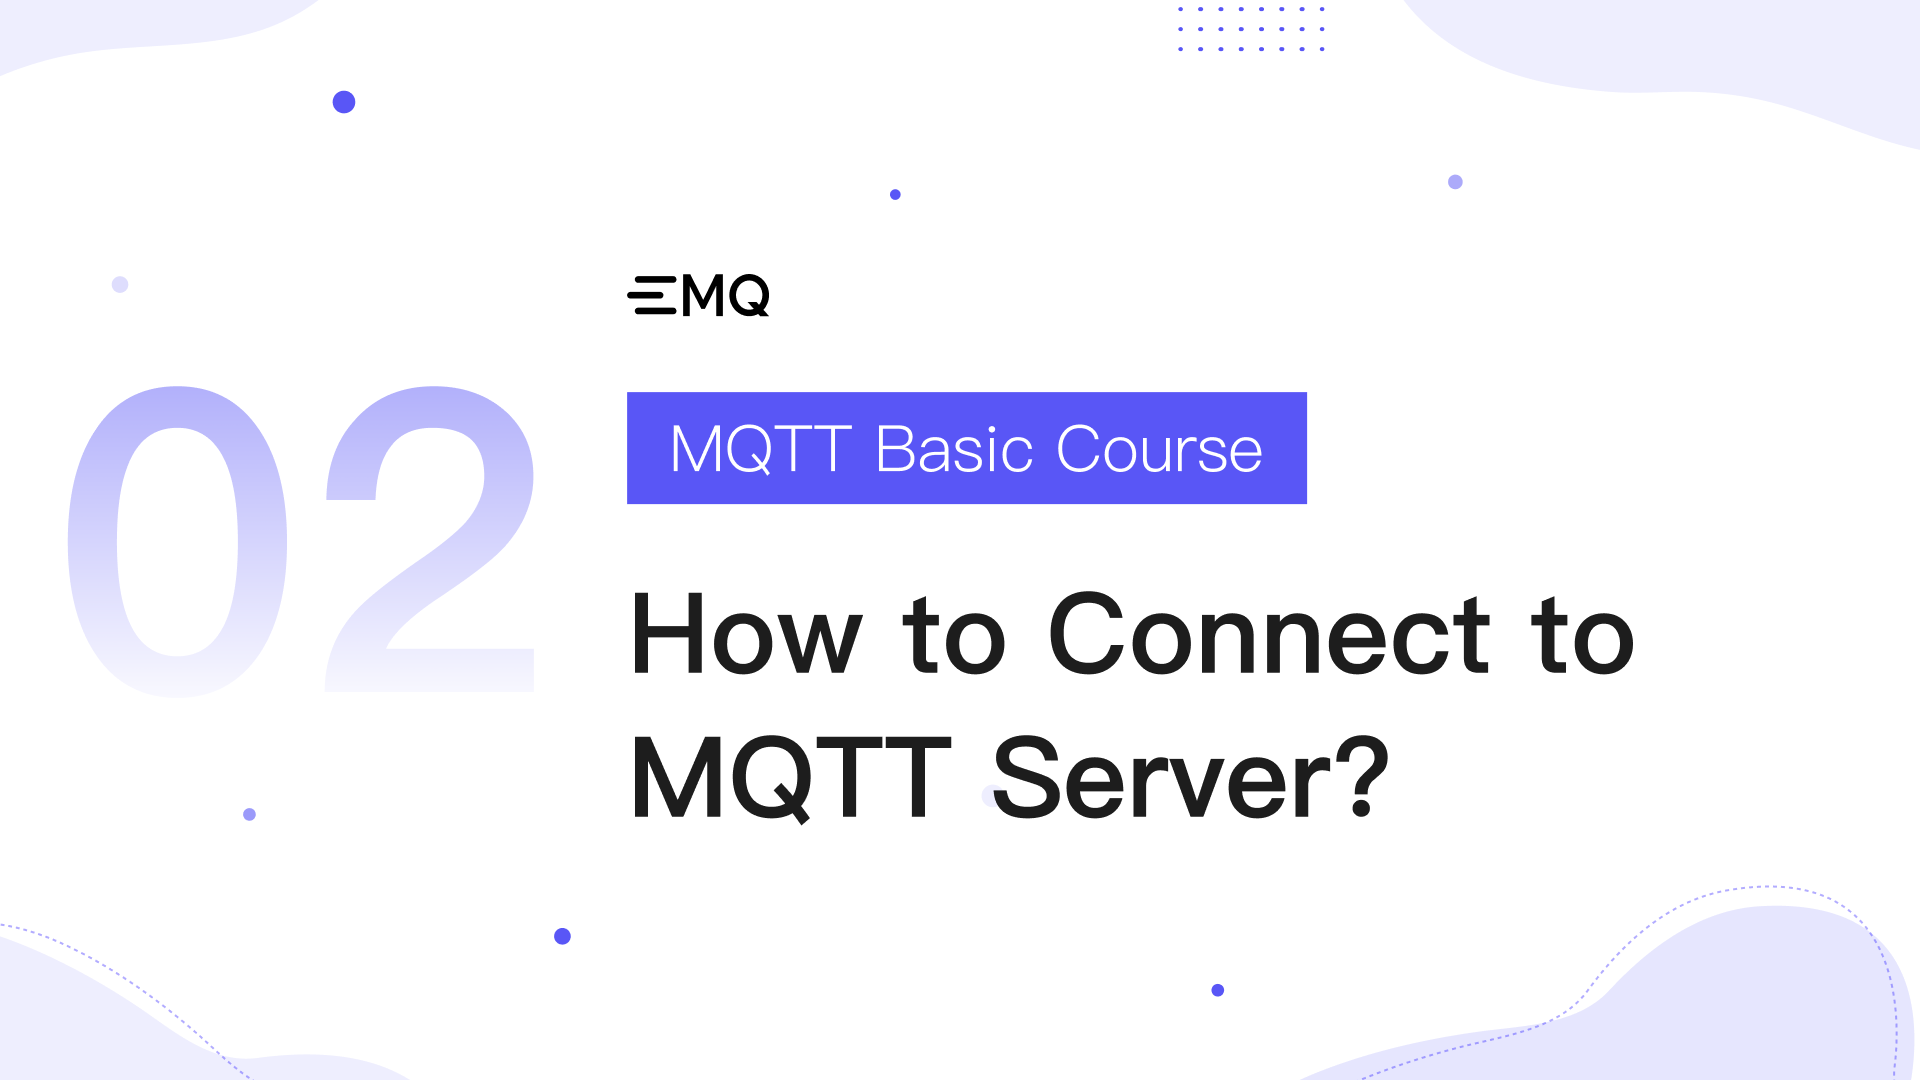 Lesson 2: How to Connect to MQTT Server? - MQTT Basic Course